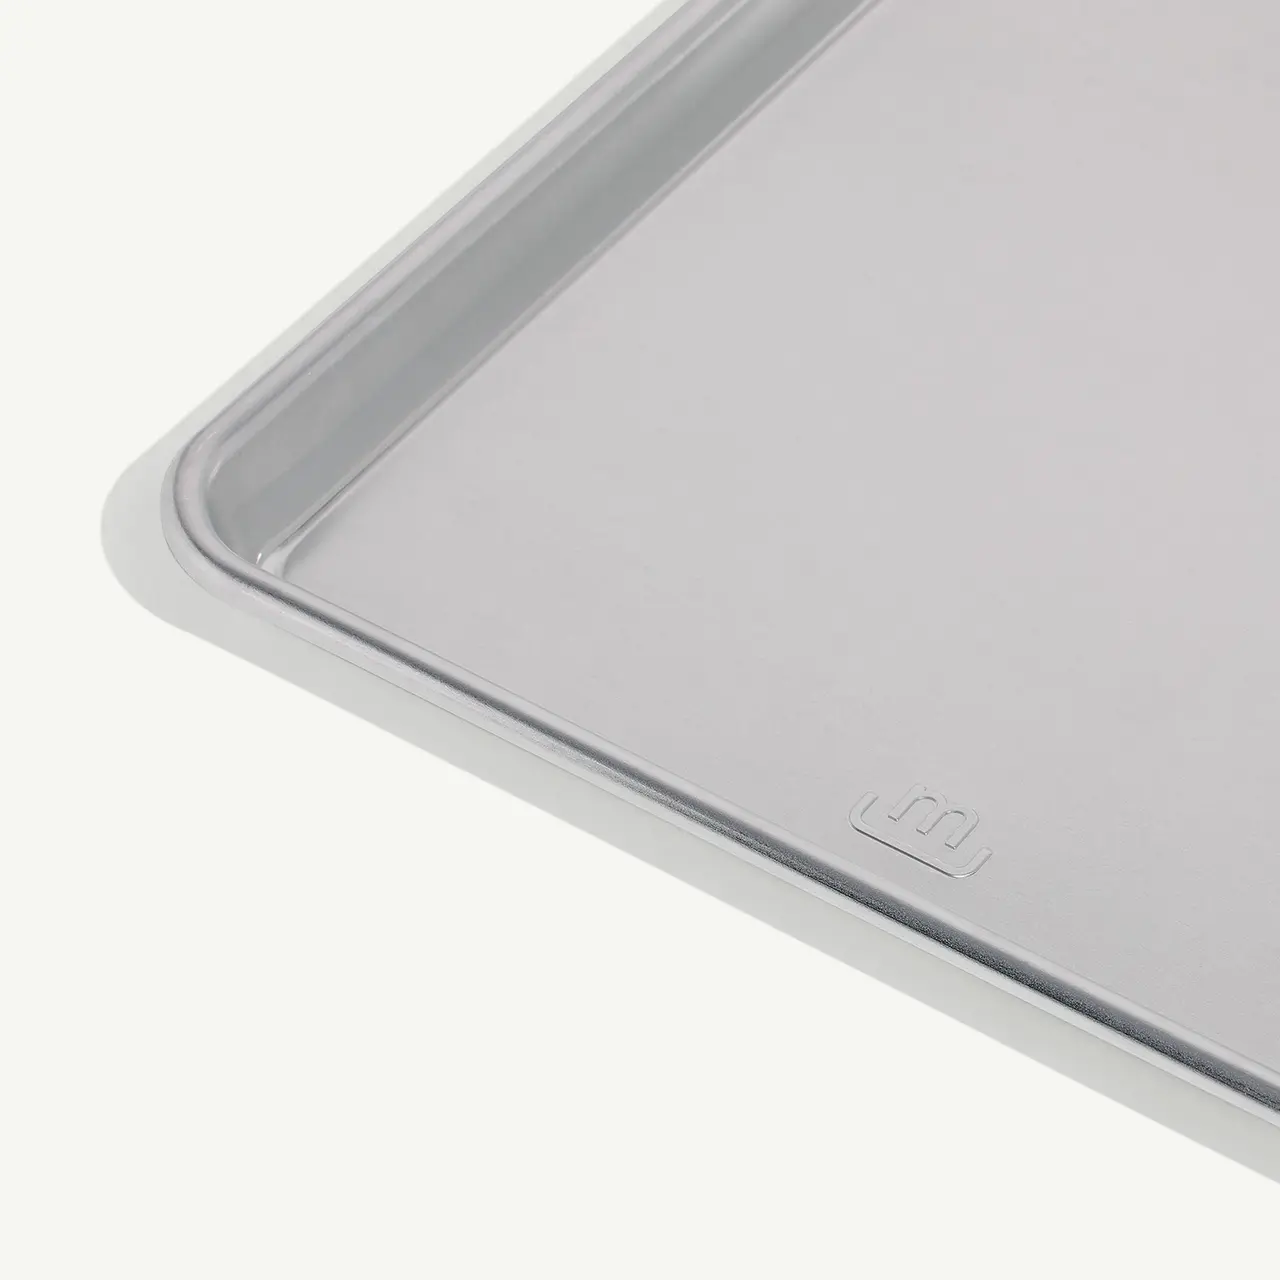 A close-up view of a grey laptop lid corner with an embossed logo.